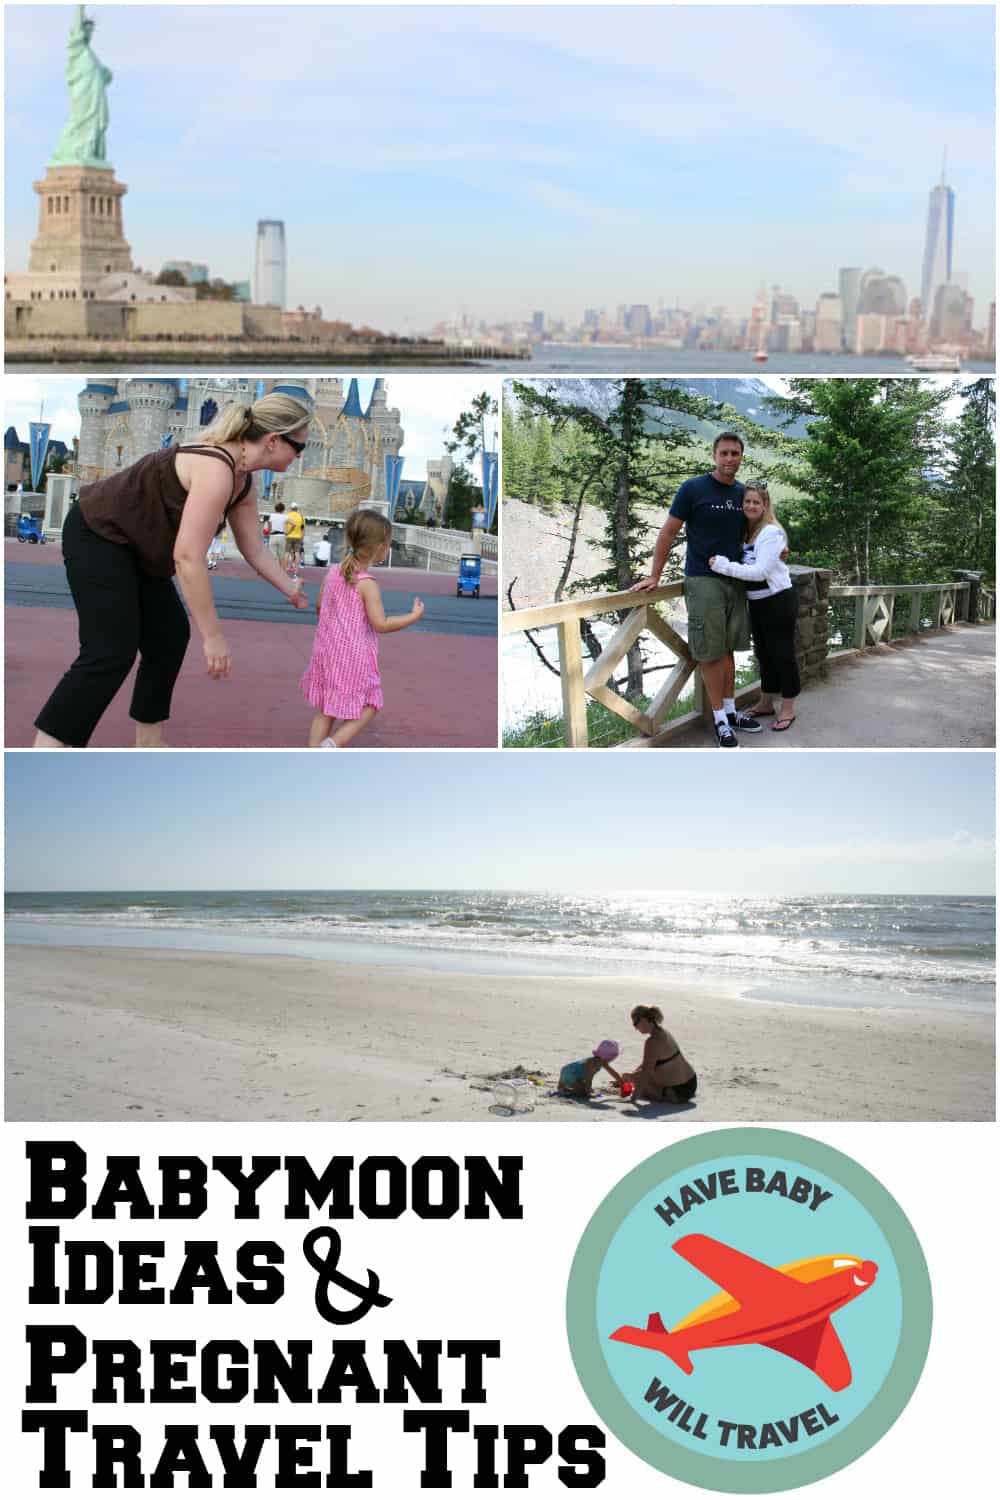 Babymoon Ideas & Tips for Travel while Pregnant